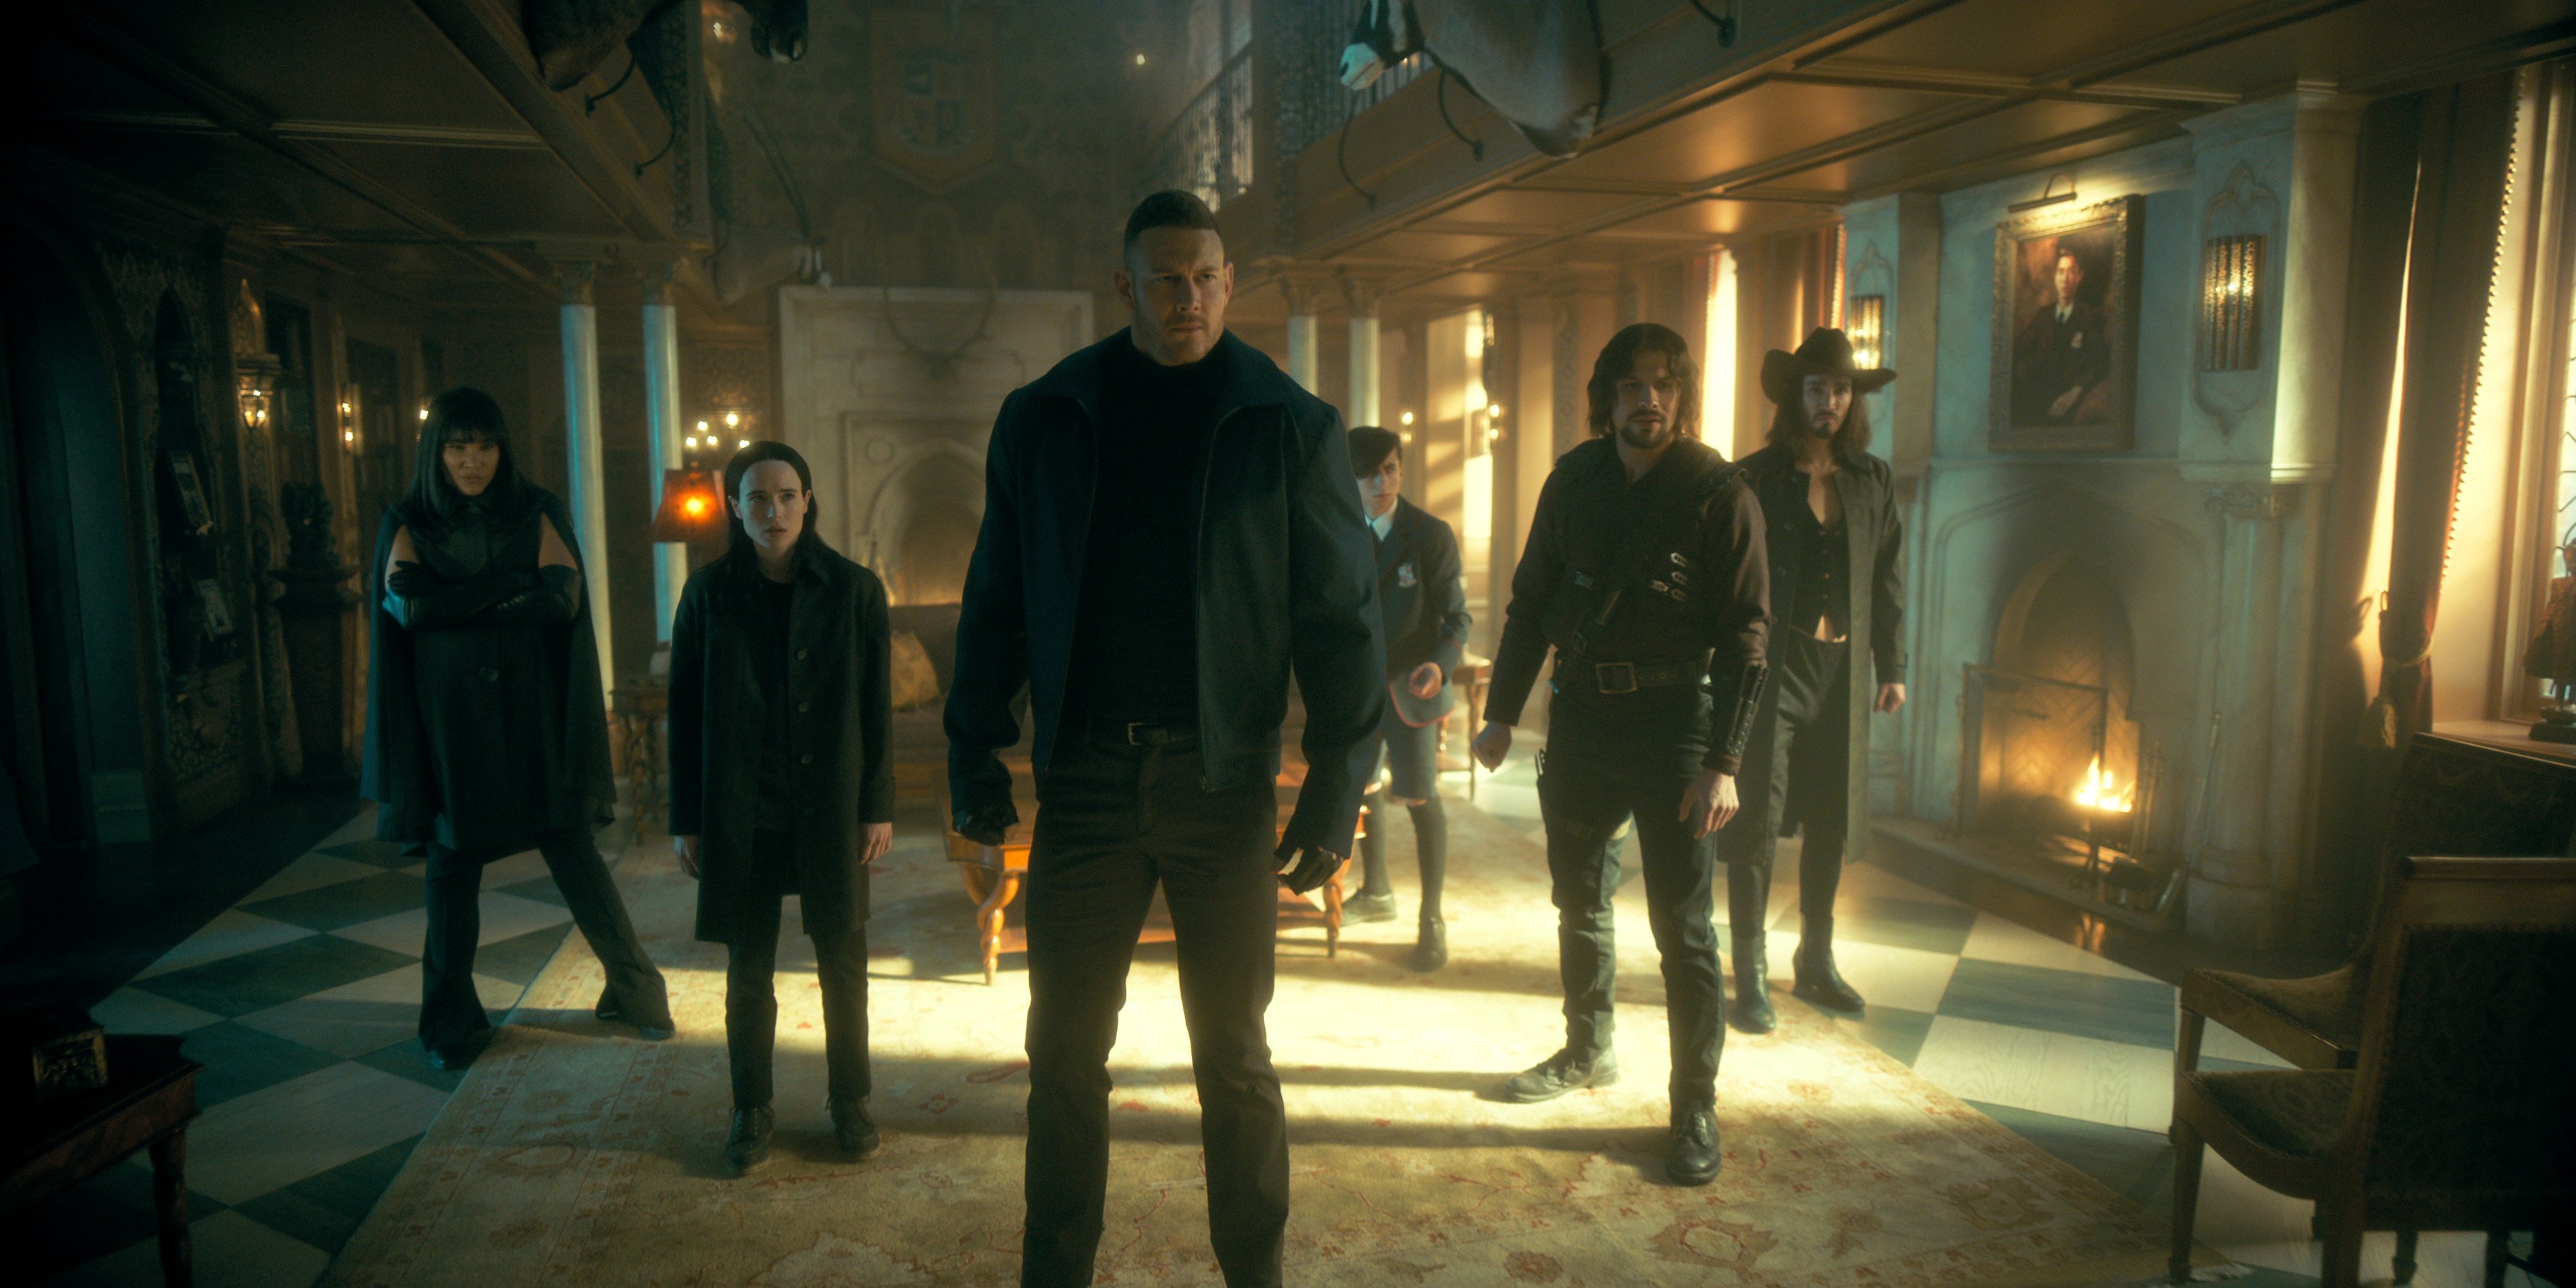 . (L to R) Emmy Raver-Lampman as Allison Hargreeves, Elliot Page, Tom Hopper as Luther Hargreeves, Aidan Gallagher as Number Five, David Castañeda as Diego Hargreeves, Robert Sheehan as Klaus Hargreeves in 'The Umbrella Academy' Season 3 Episode 1